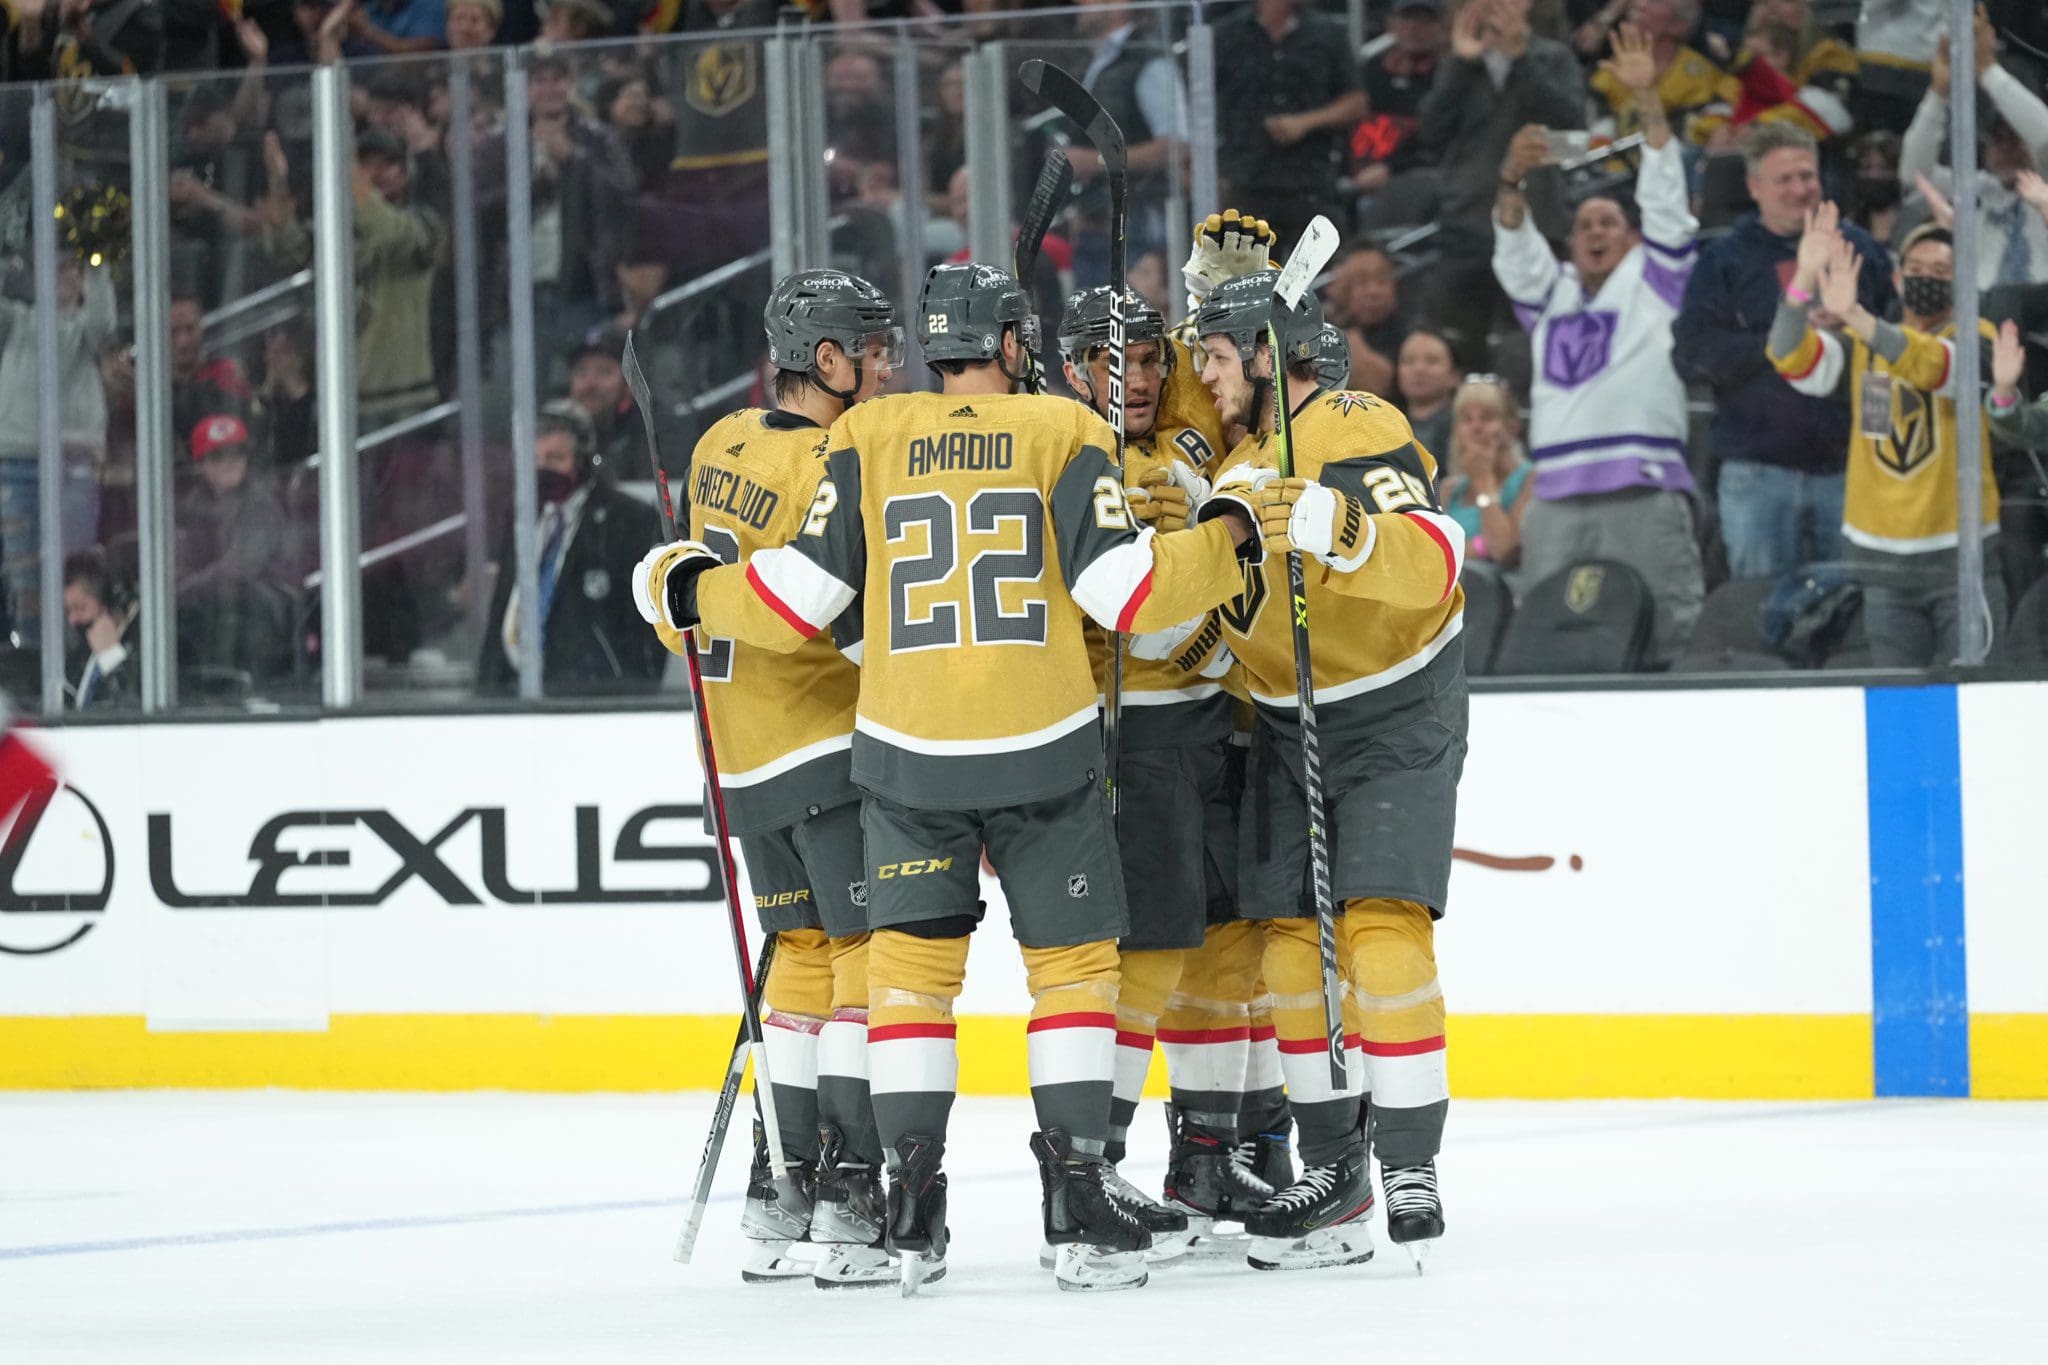 Golden Knights streaming service to launch in September - Las